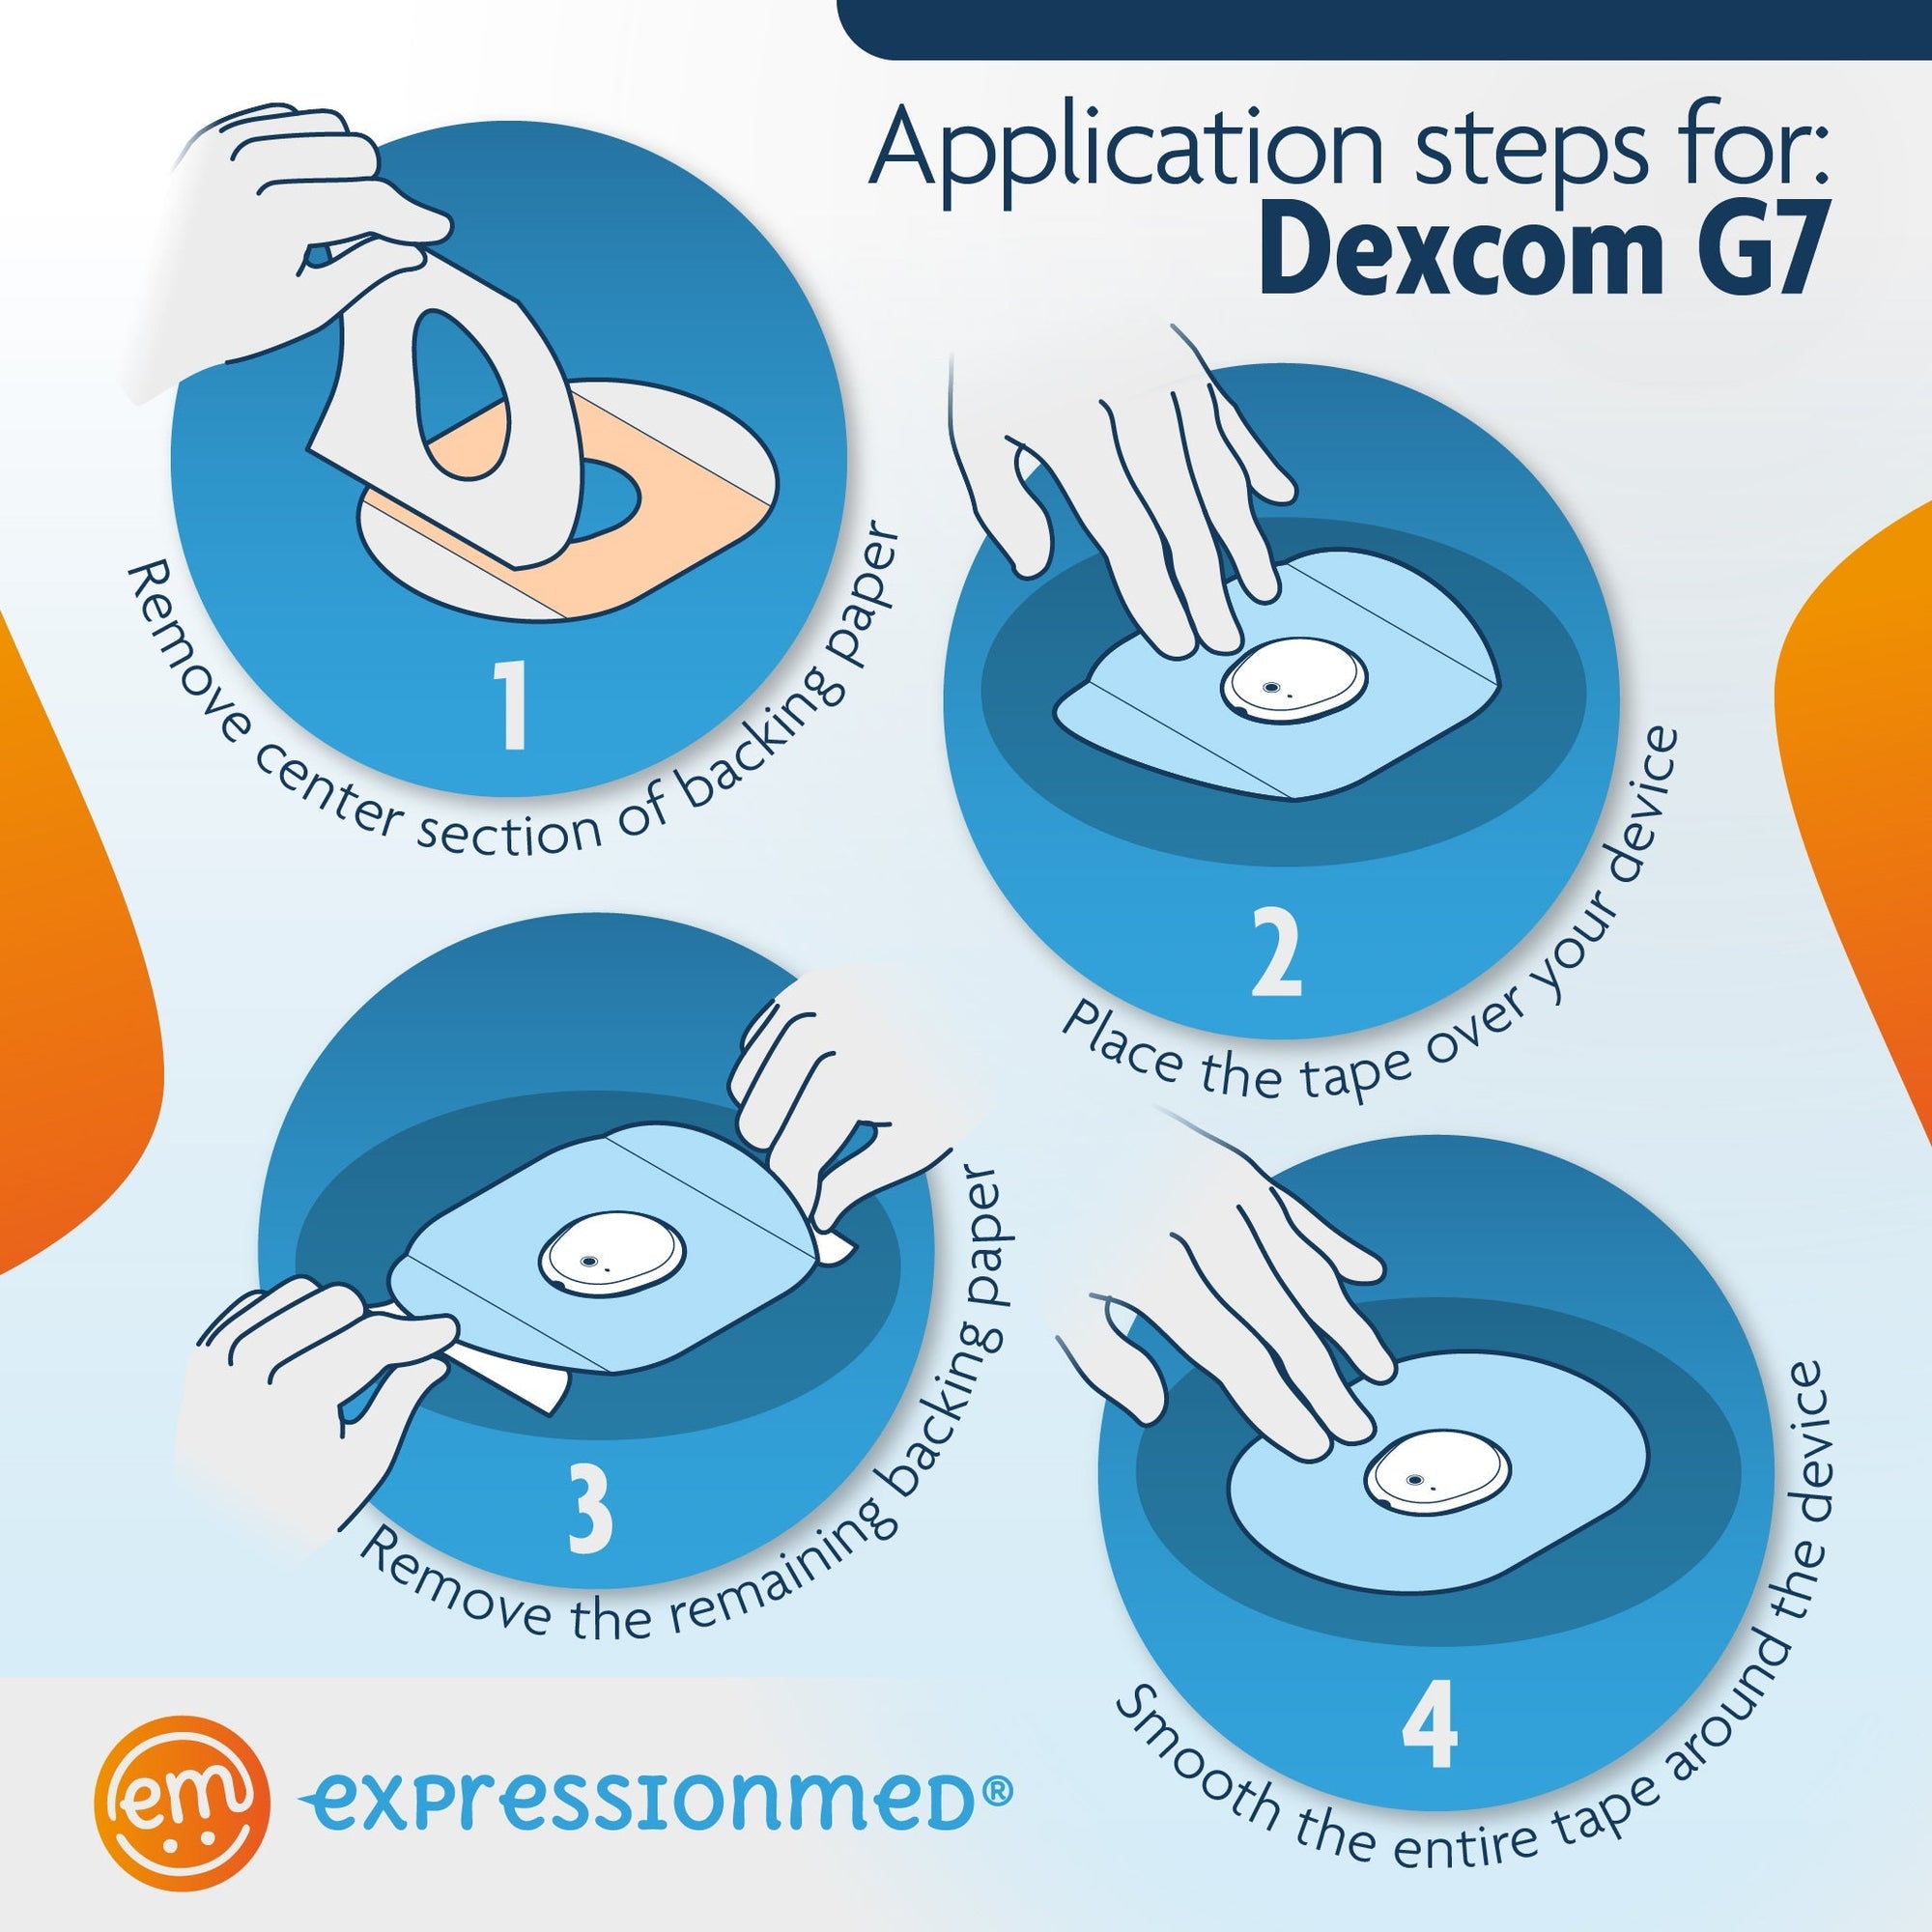 Application Instructions Application Instructions. 1. Prep skin with soap and water. 2. Remove Middle Section and lay center hole over device. 3. Peel off both end sections and smooth down on skin. To remove, hold an edge and stretch material off skin., Dexcom Stelo Glucose Biosensor System